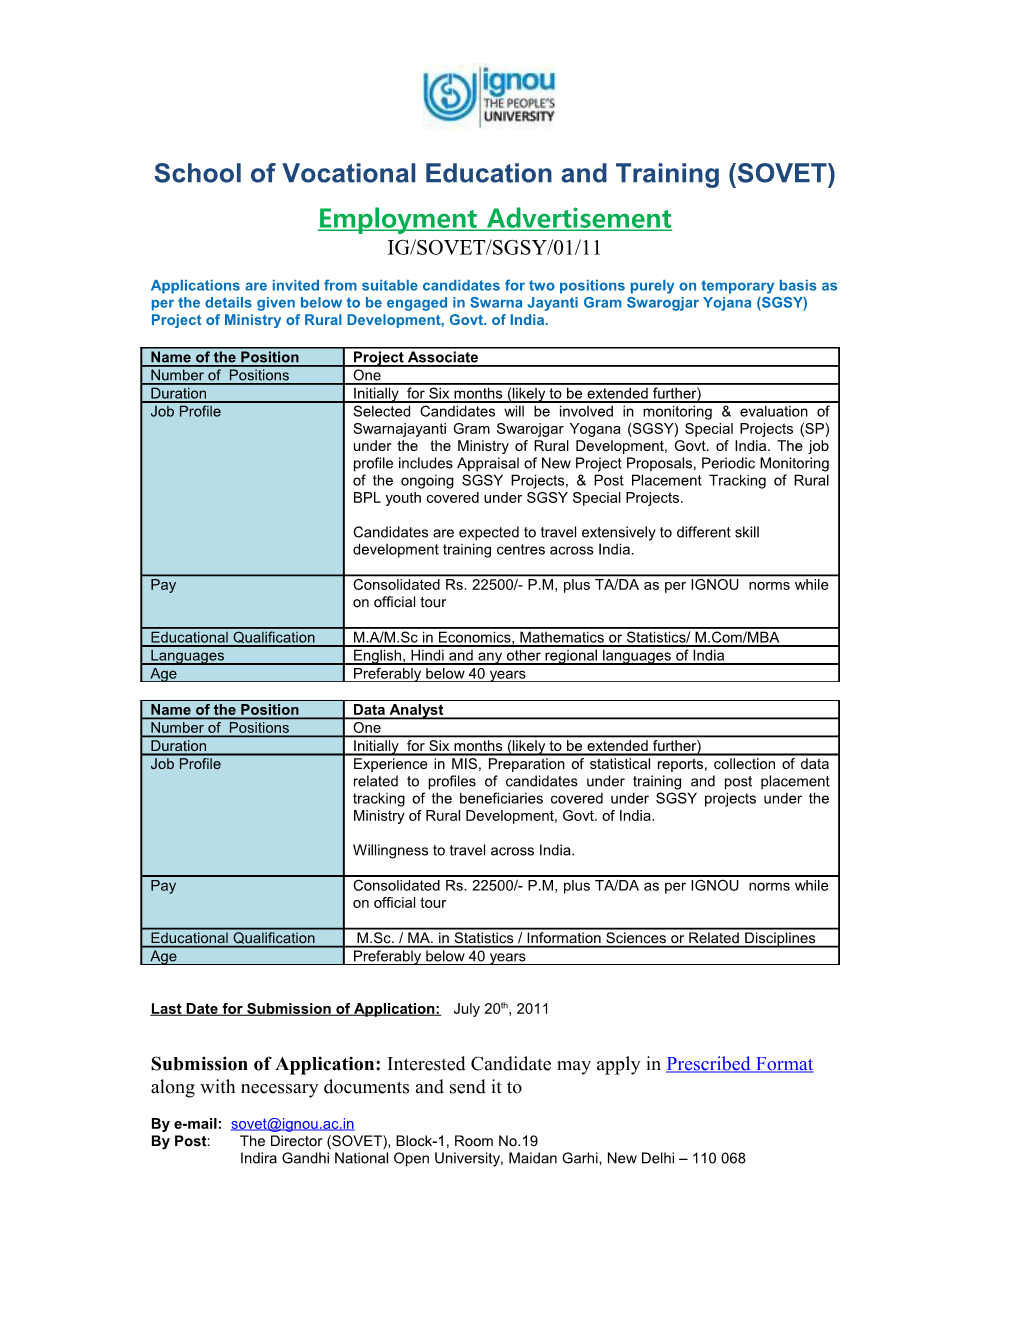 School of Vocational Education and Training (SOVET) Employment Advertisement